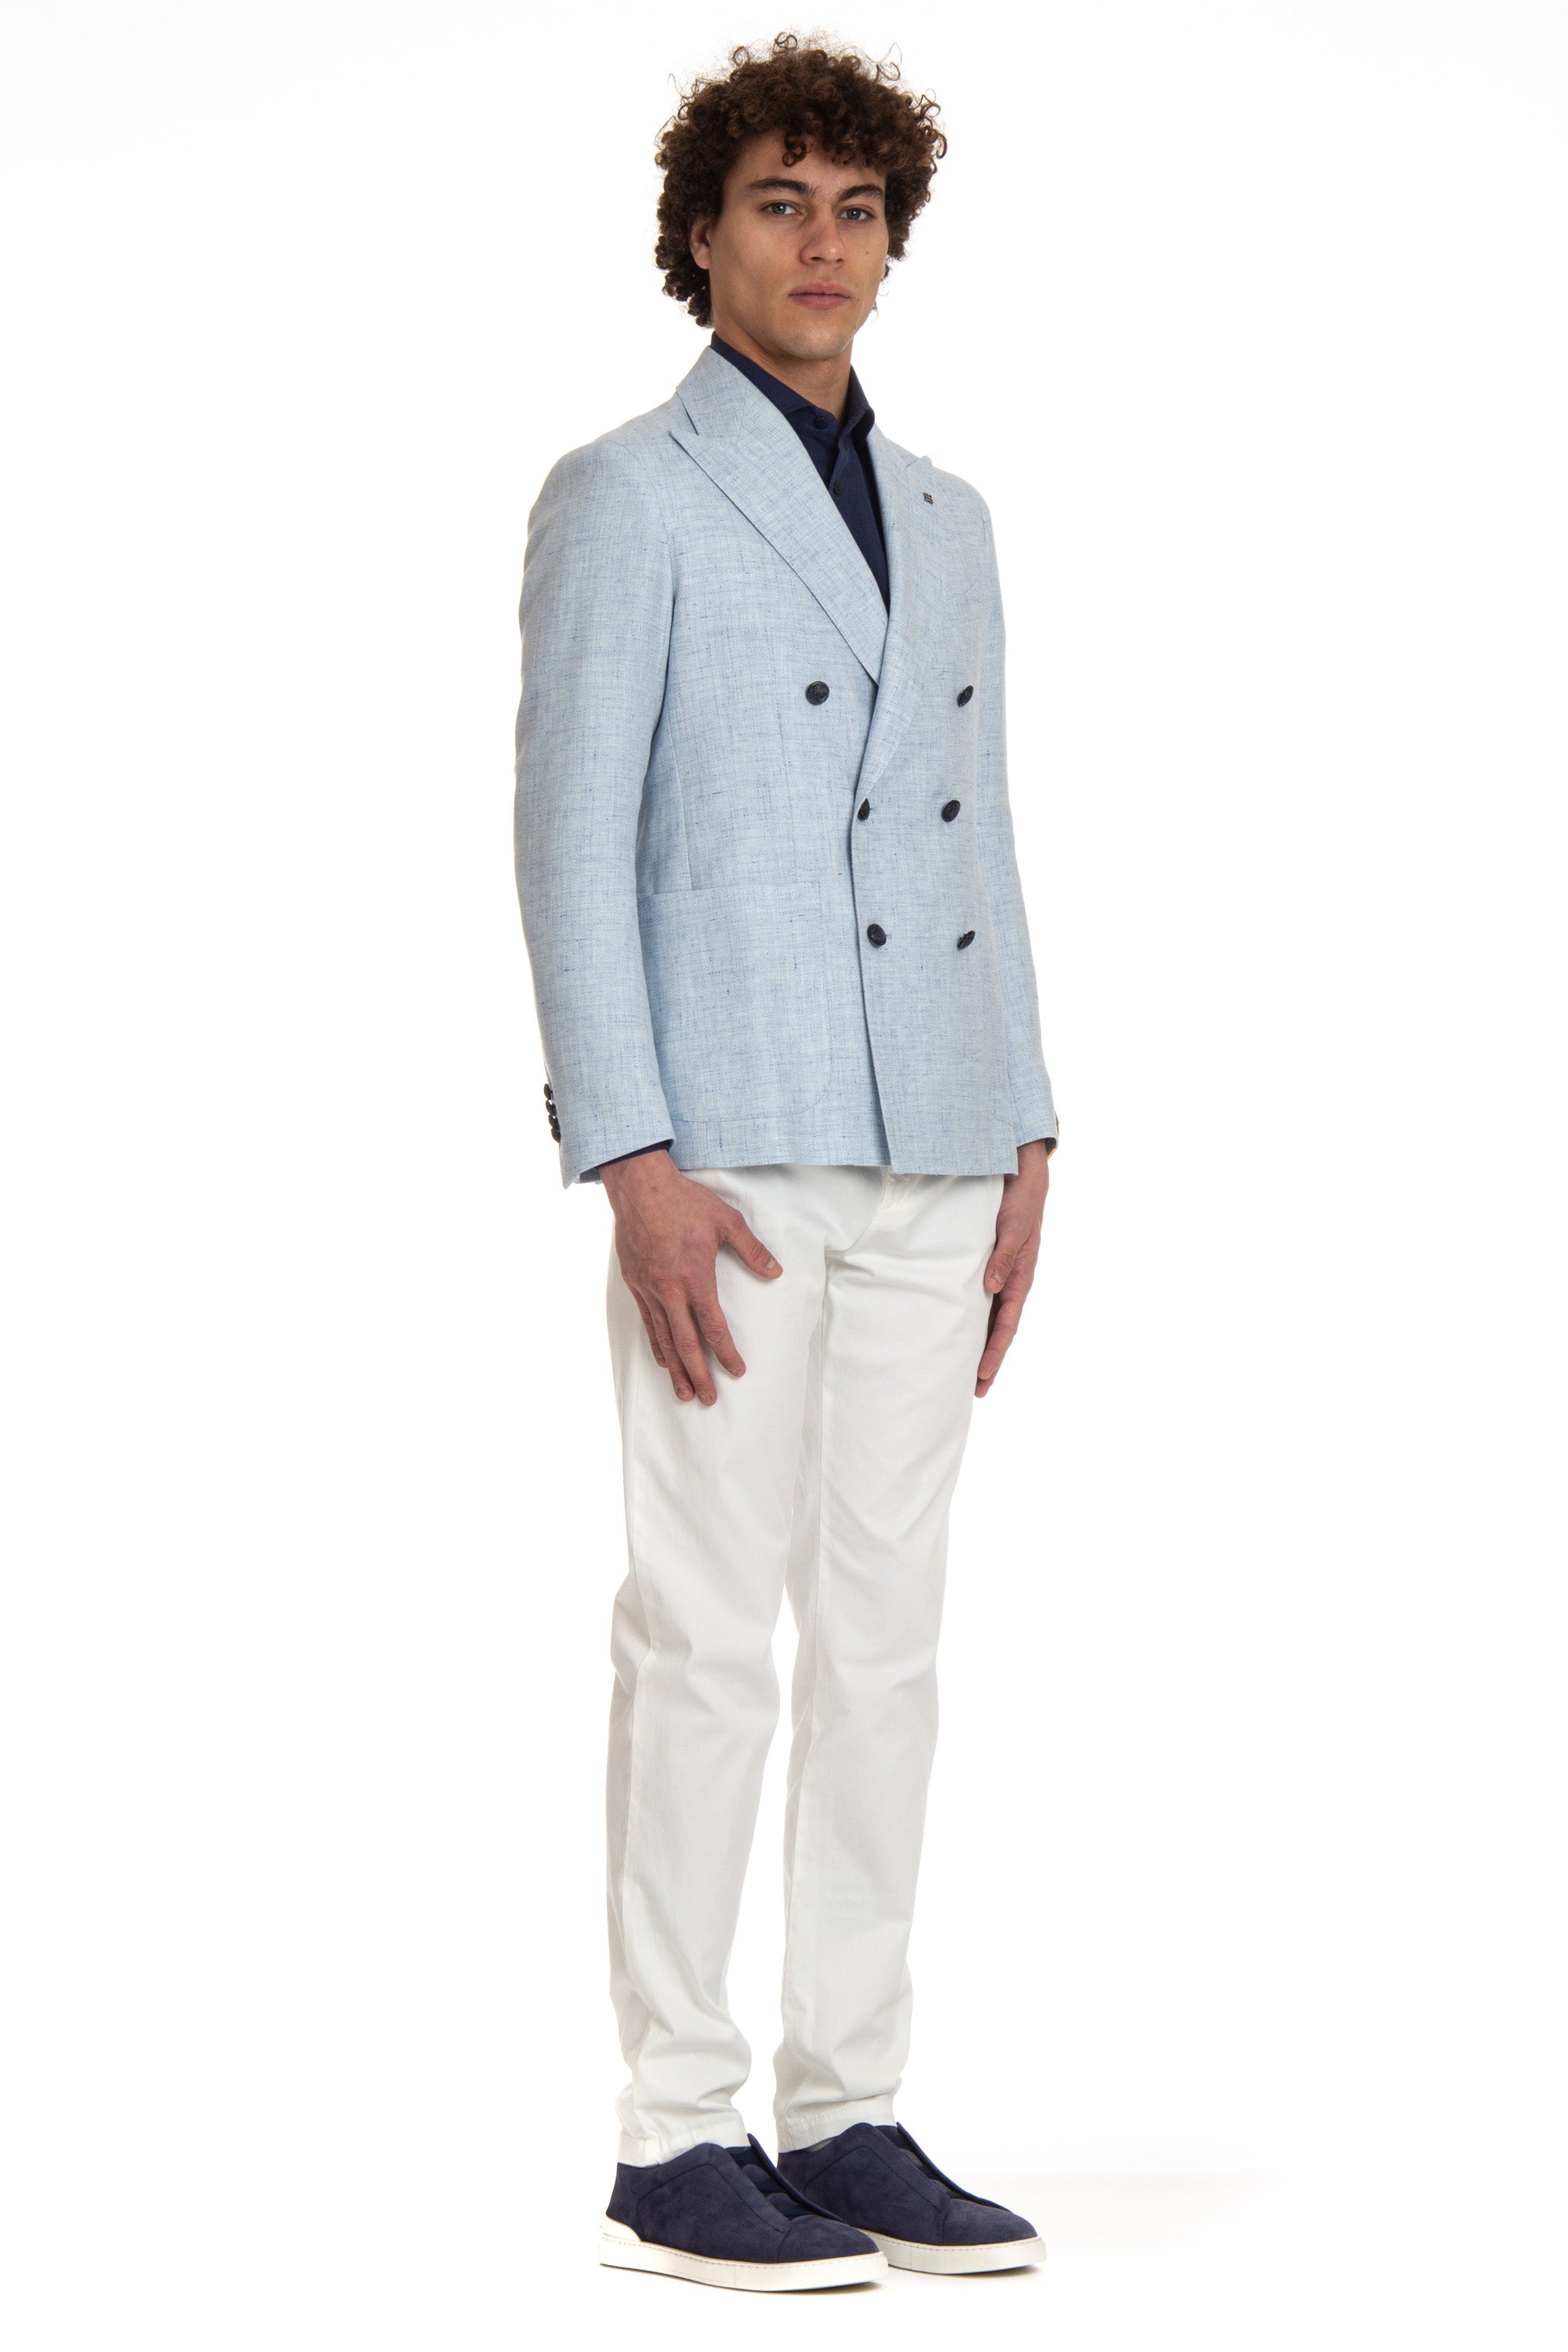 Double-breasted linen-cotton textured jacket from the Montecarlo line